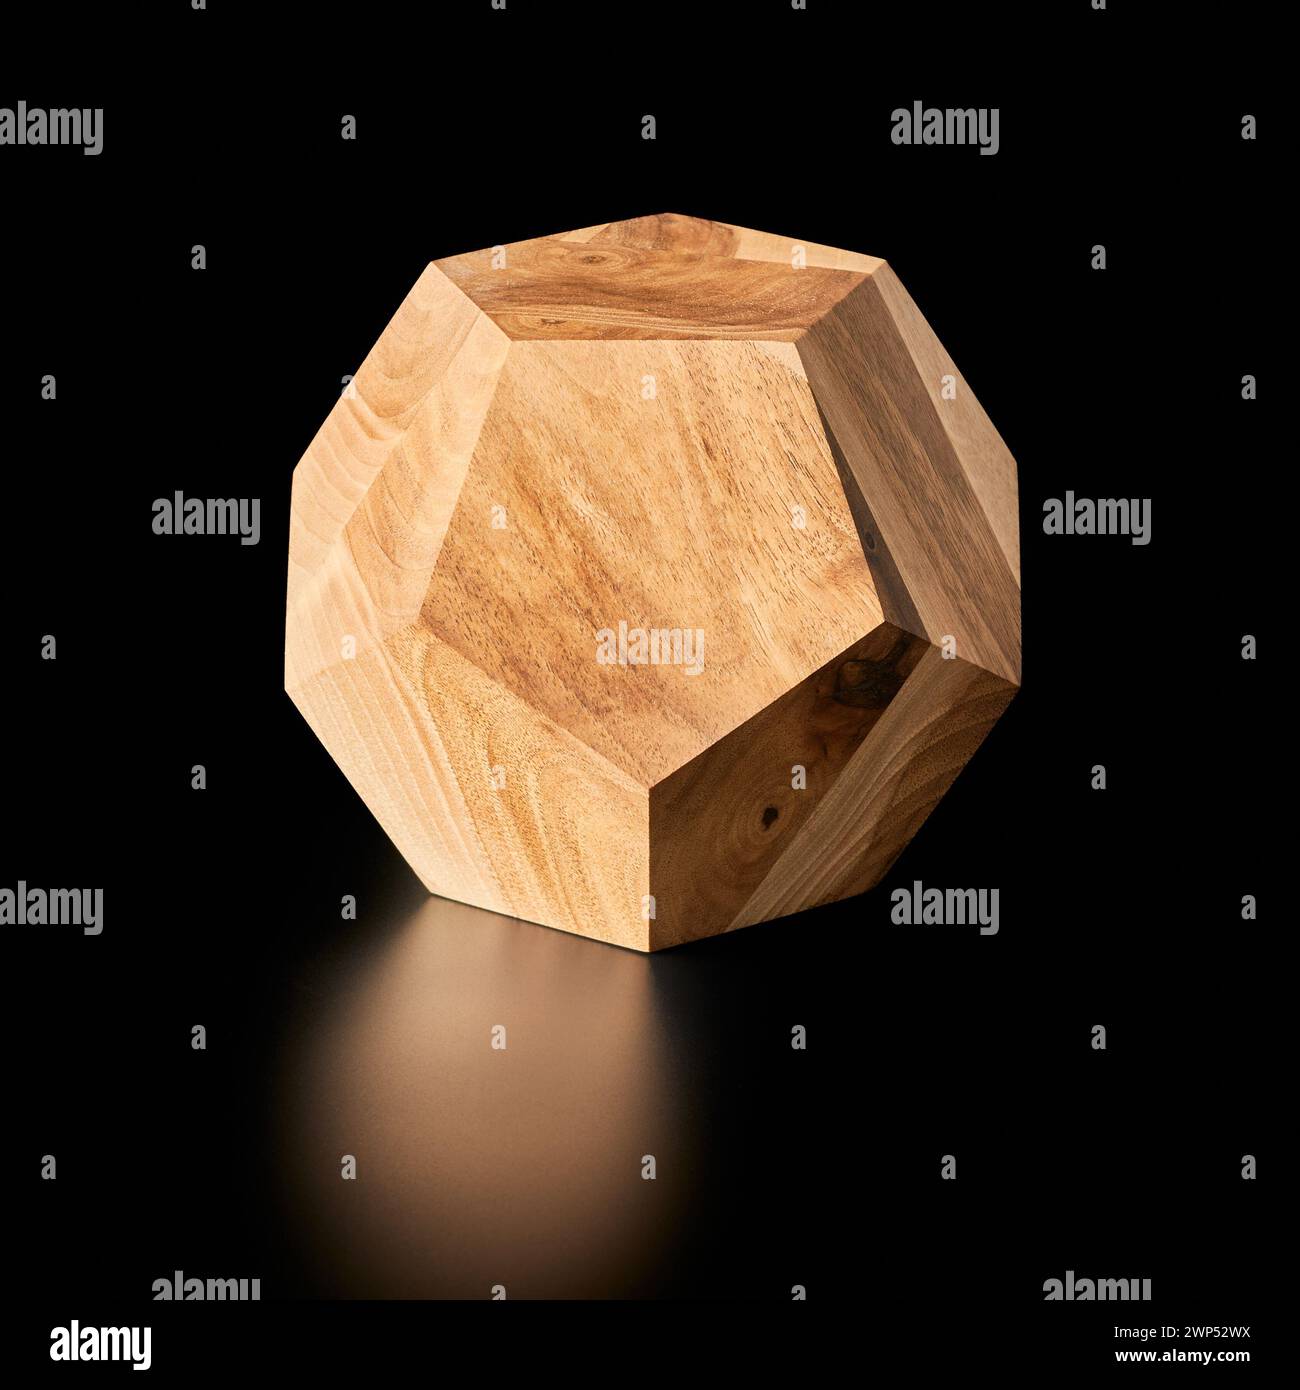 Handmade wooden regular dodecahedron - Platonic solid on a black background Stock Photo